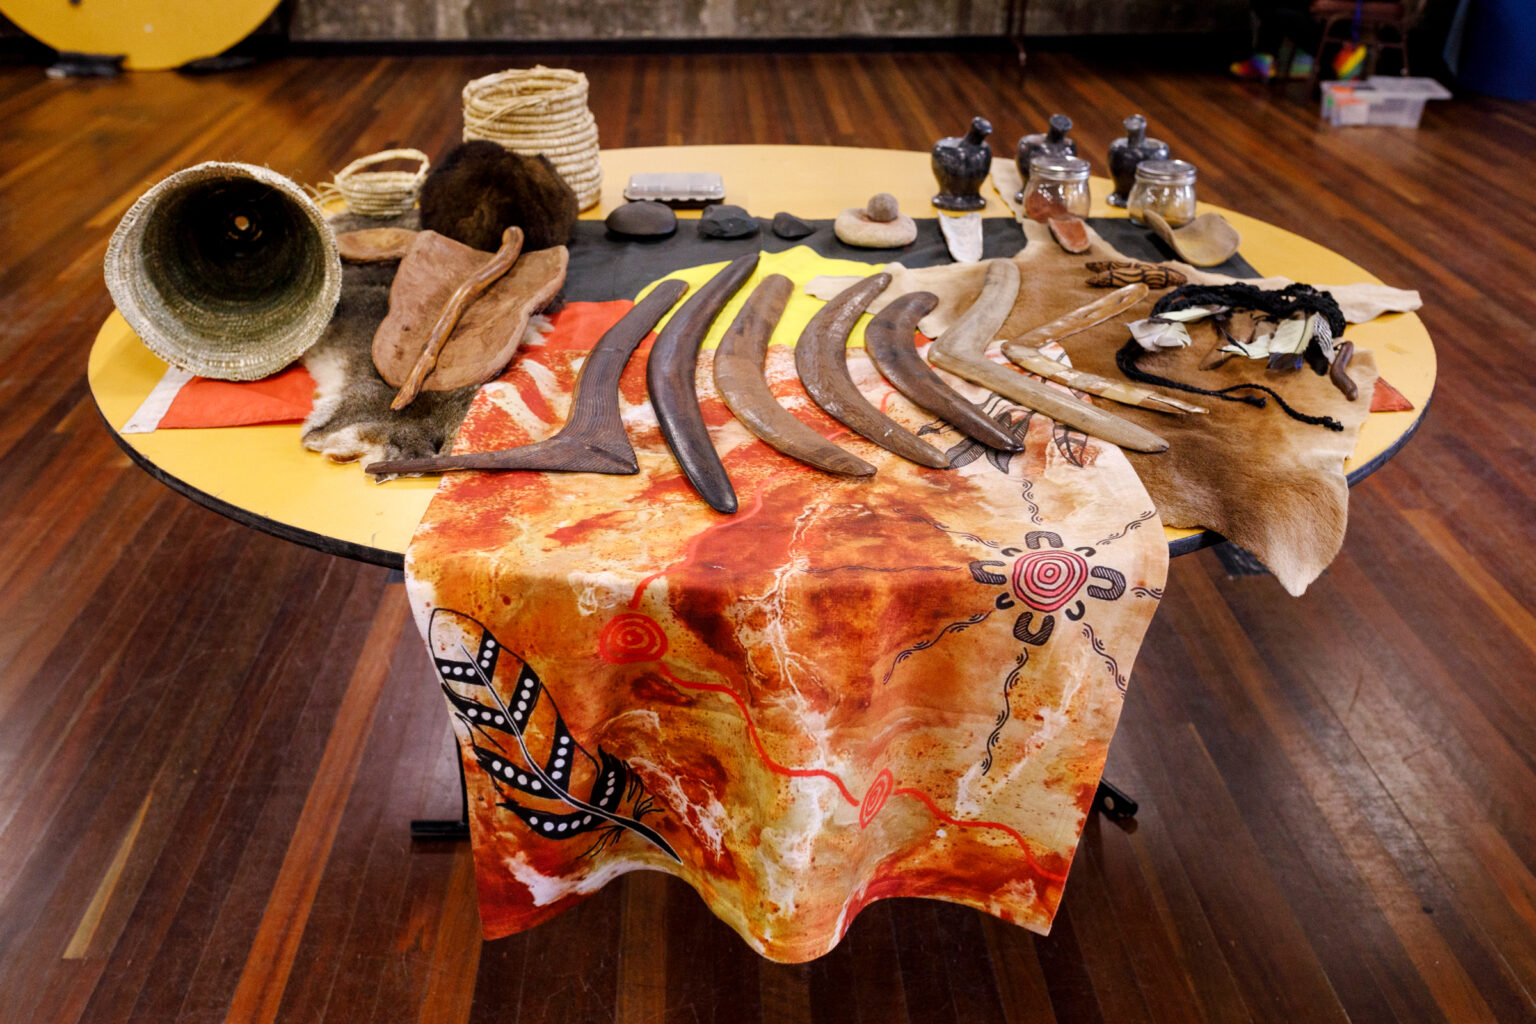 A table is shown with a variety of First Nations tools and instruments placed on top of a patterned material and possum skin. Among these items are several boomerangs, which are wooden tools that are curved in a unique shape and used for hunting or sport. Other tools include smooth rocks and woven baskets. The patterned material underneath the objects features bold geometric shapes and vibrant colours, while the possum skin adds a layer of texture and depth to the overall display.